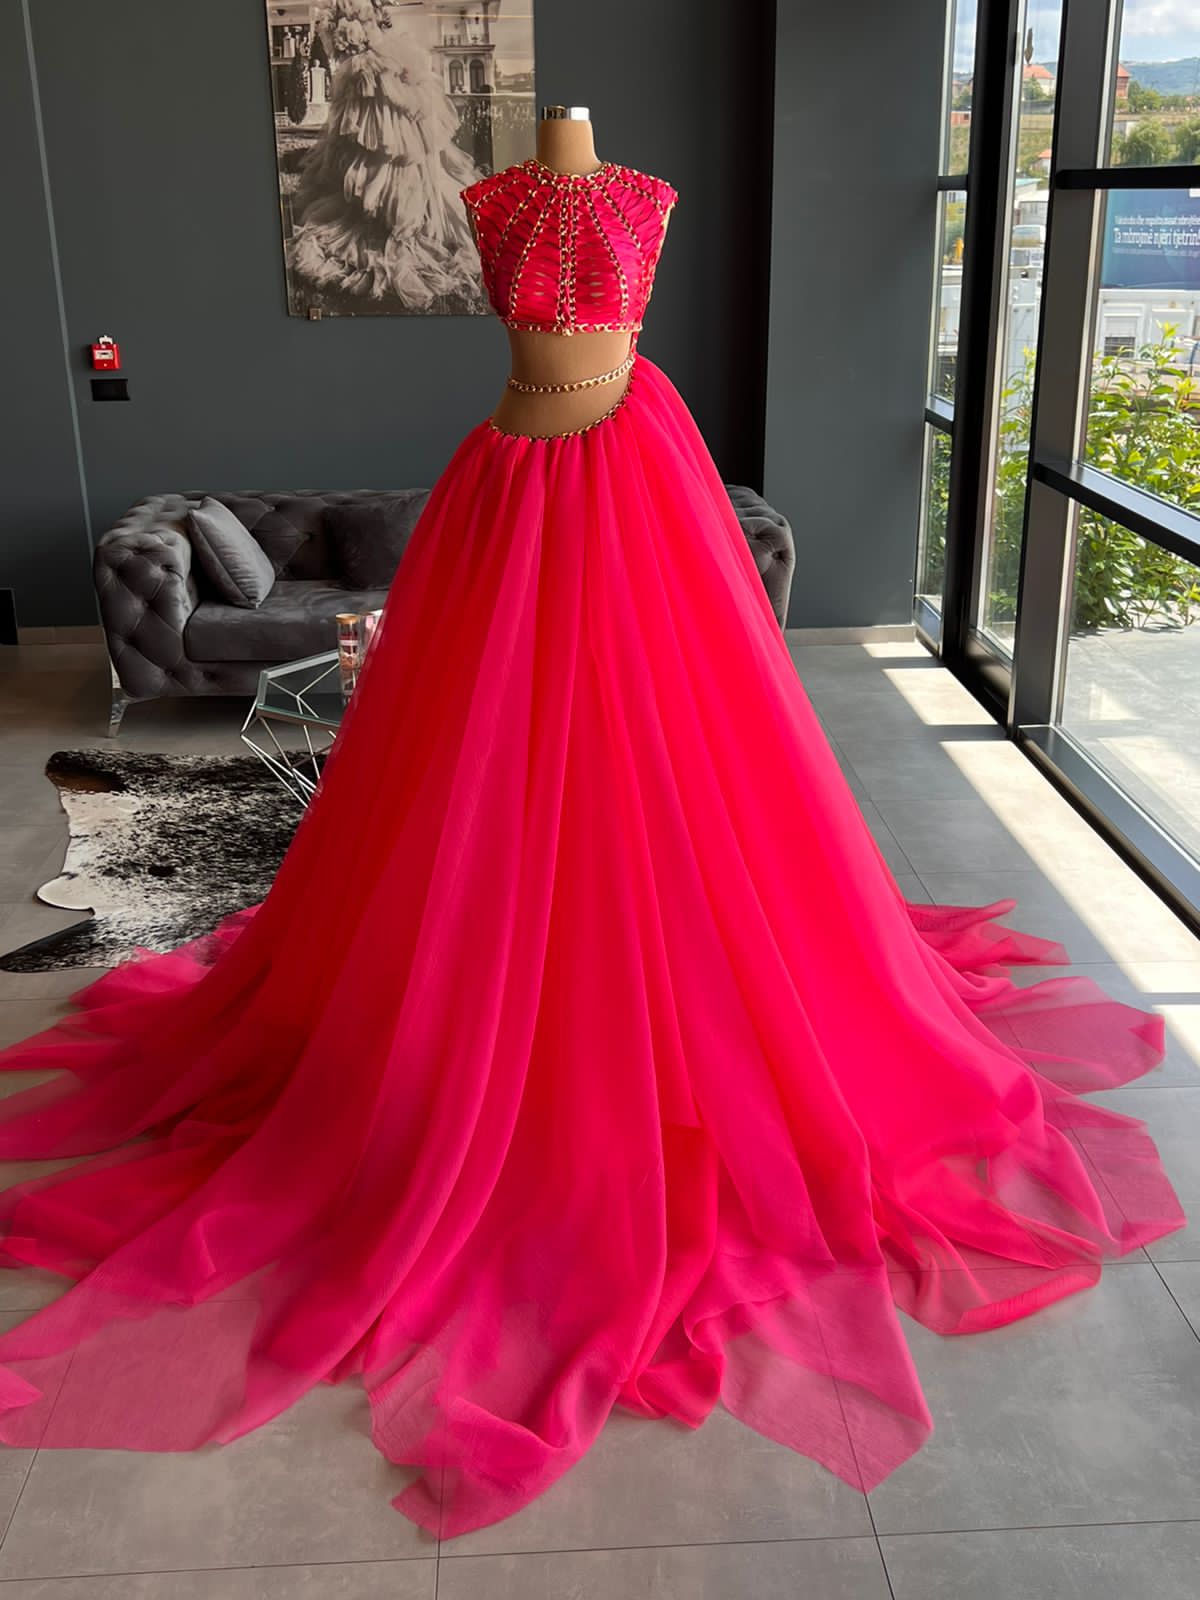 Hot Pink Ribbons & Chains Gown